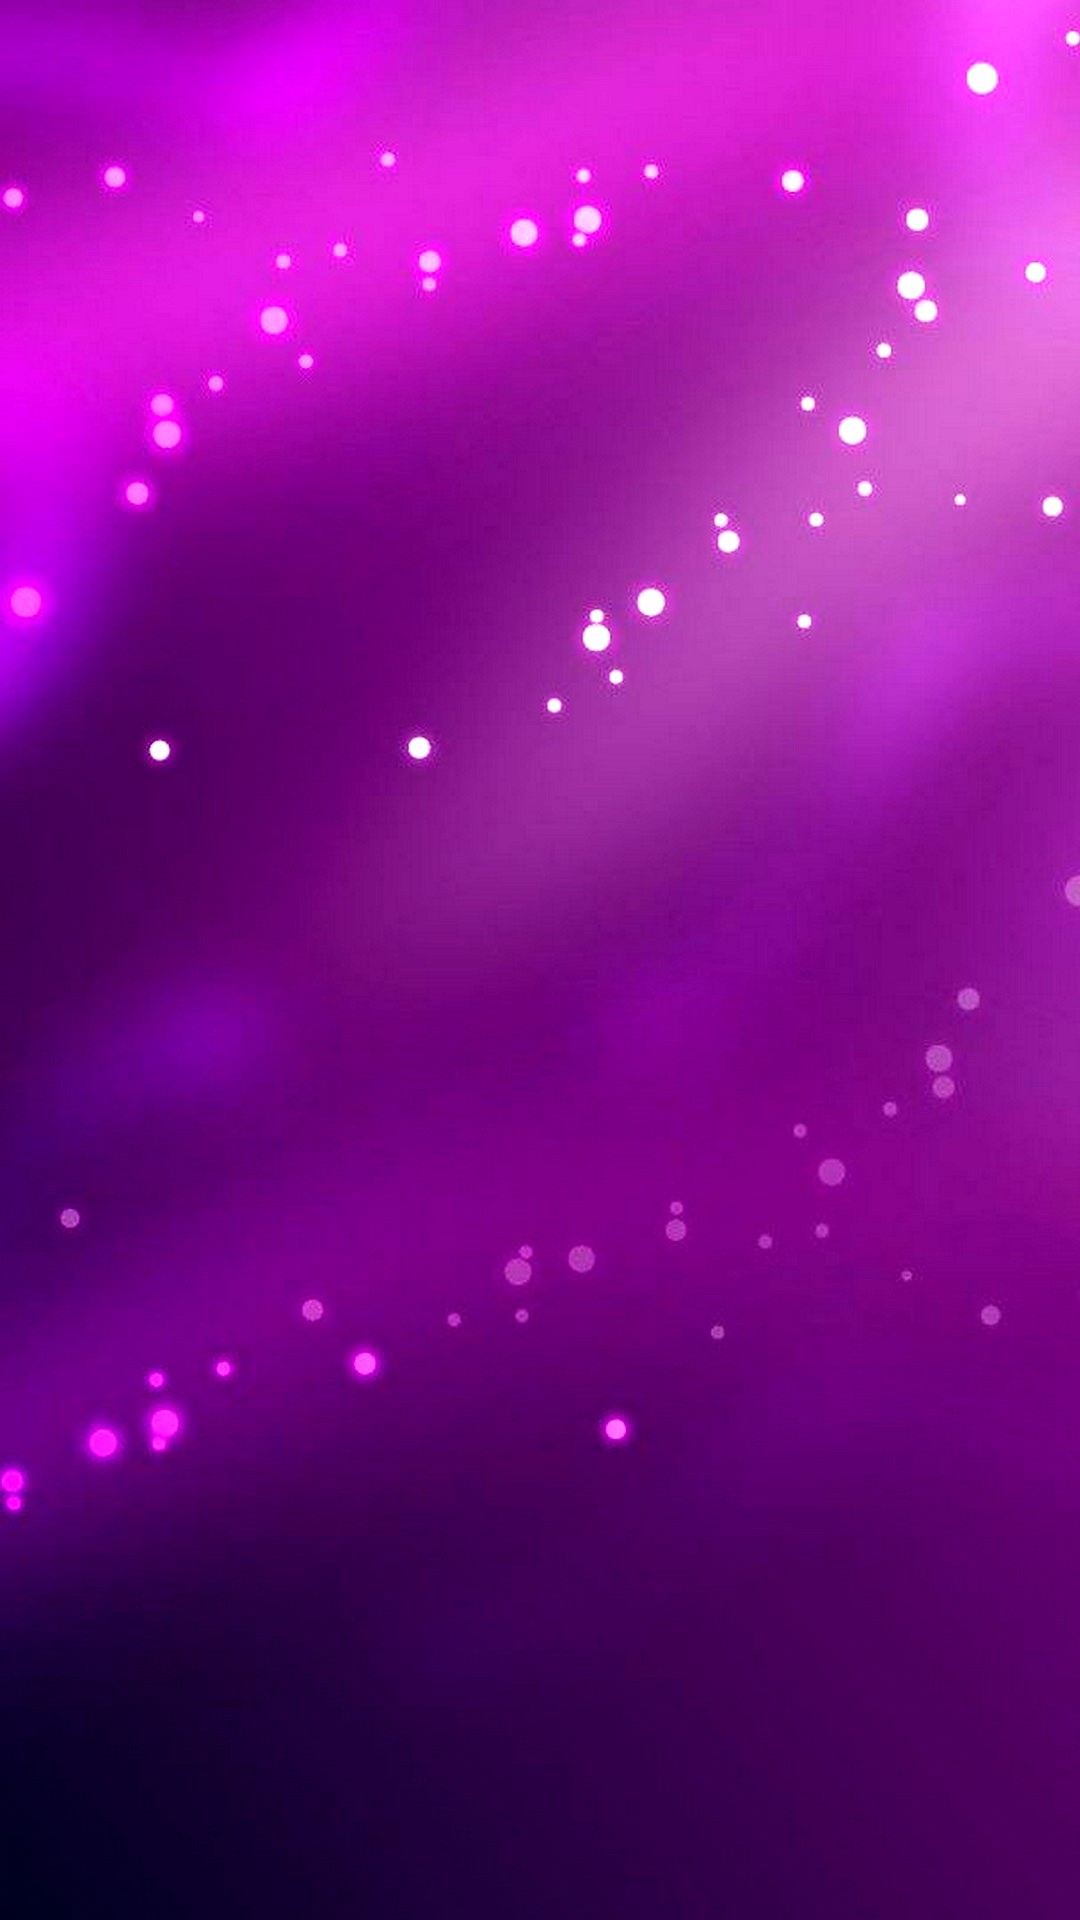 Purple Phone 8 Wallpaper with high-resolution 1080x1920 pixel. Download all Mobile Wallpapers and Use them as wallpapers for your iPhone, Tablet, iPad, Android and other mobile devices